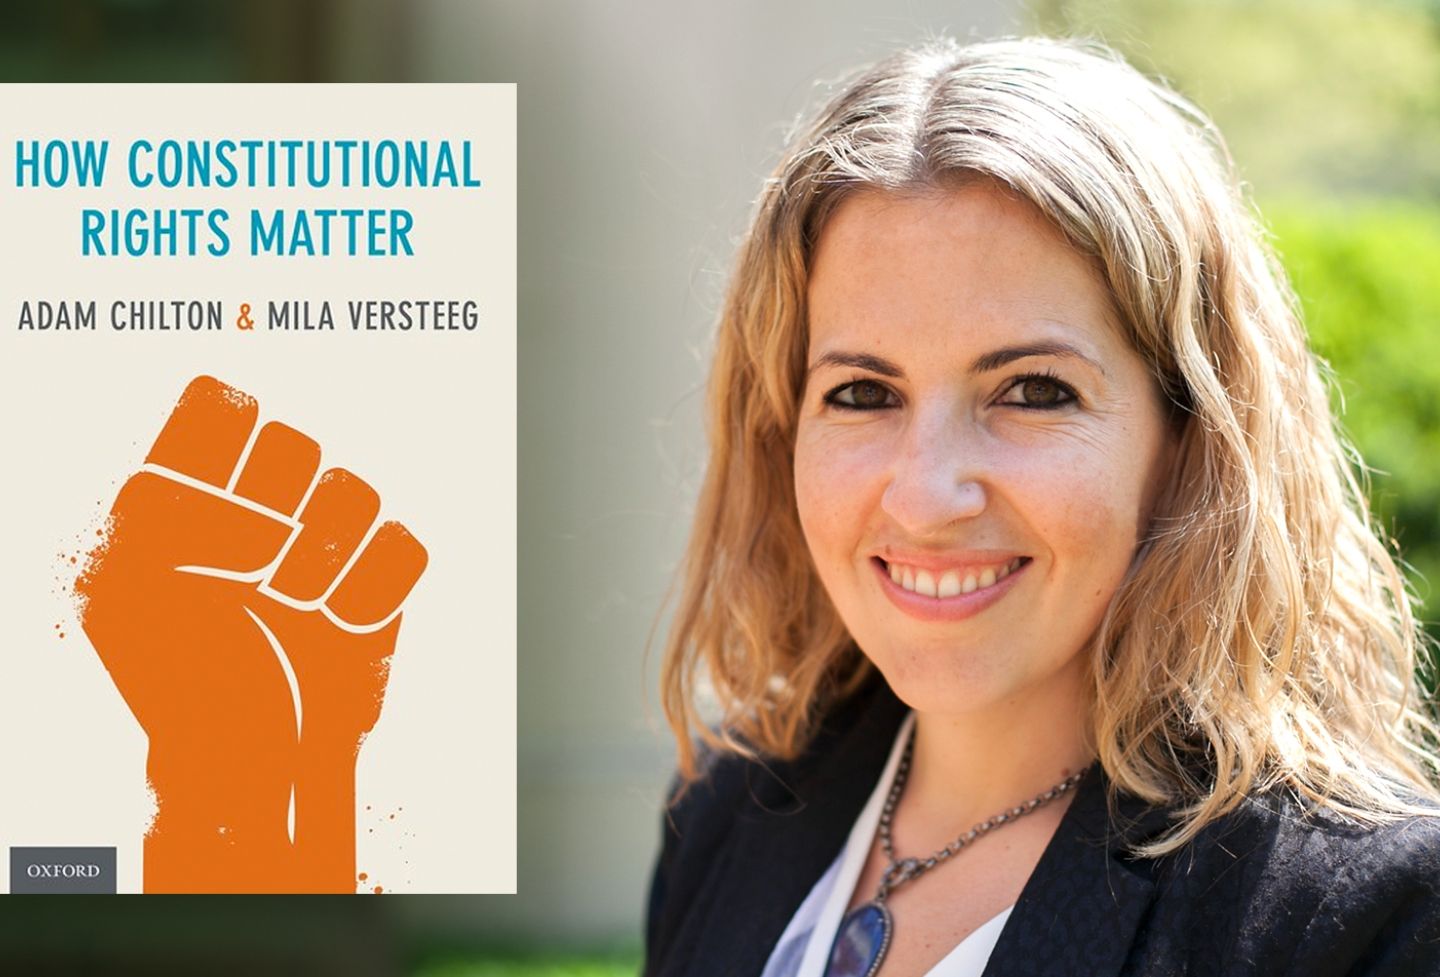 Mila Versteeg and "How Constitutional Rights Matter"